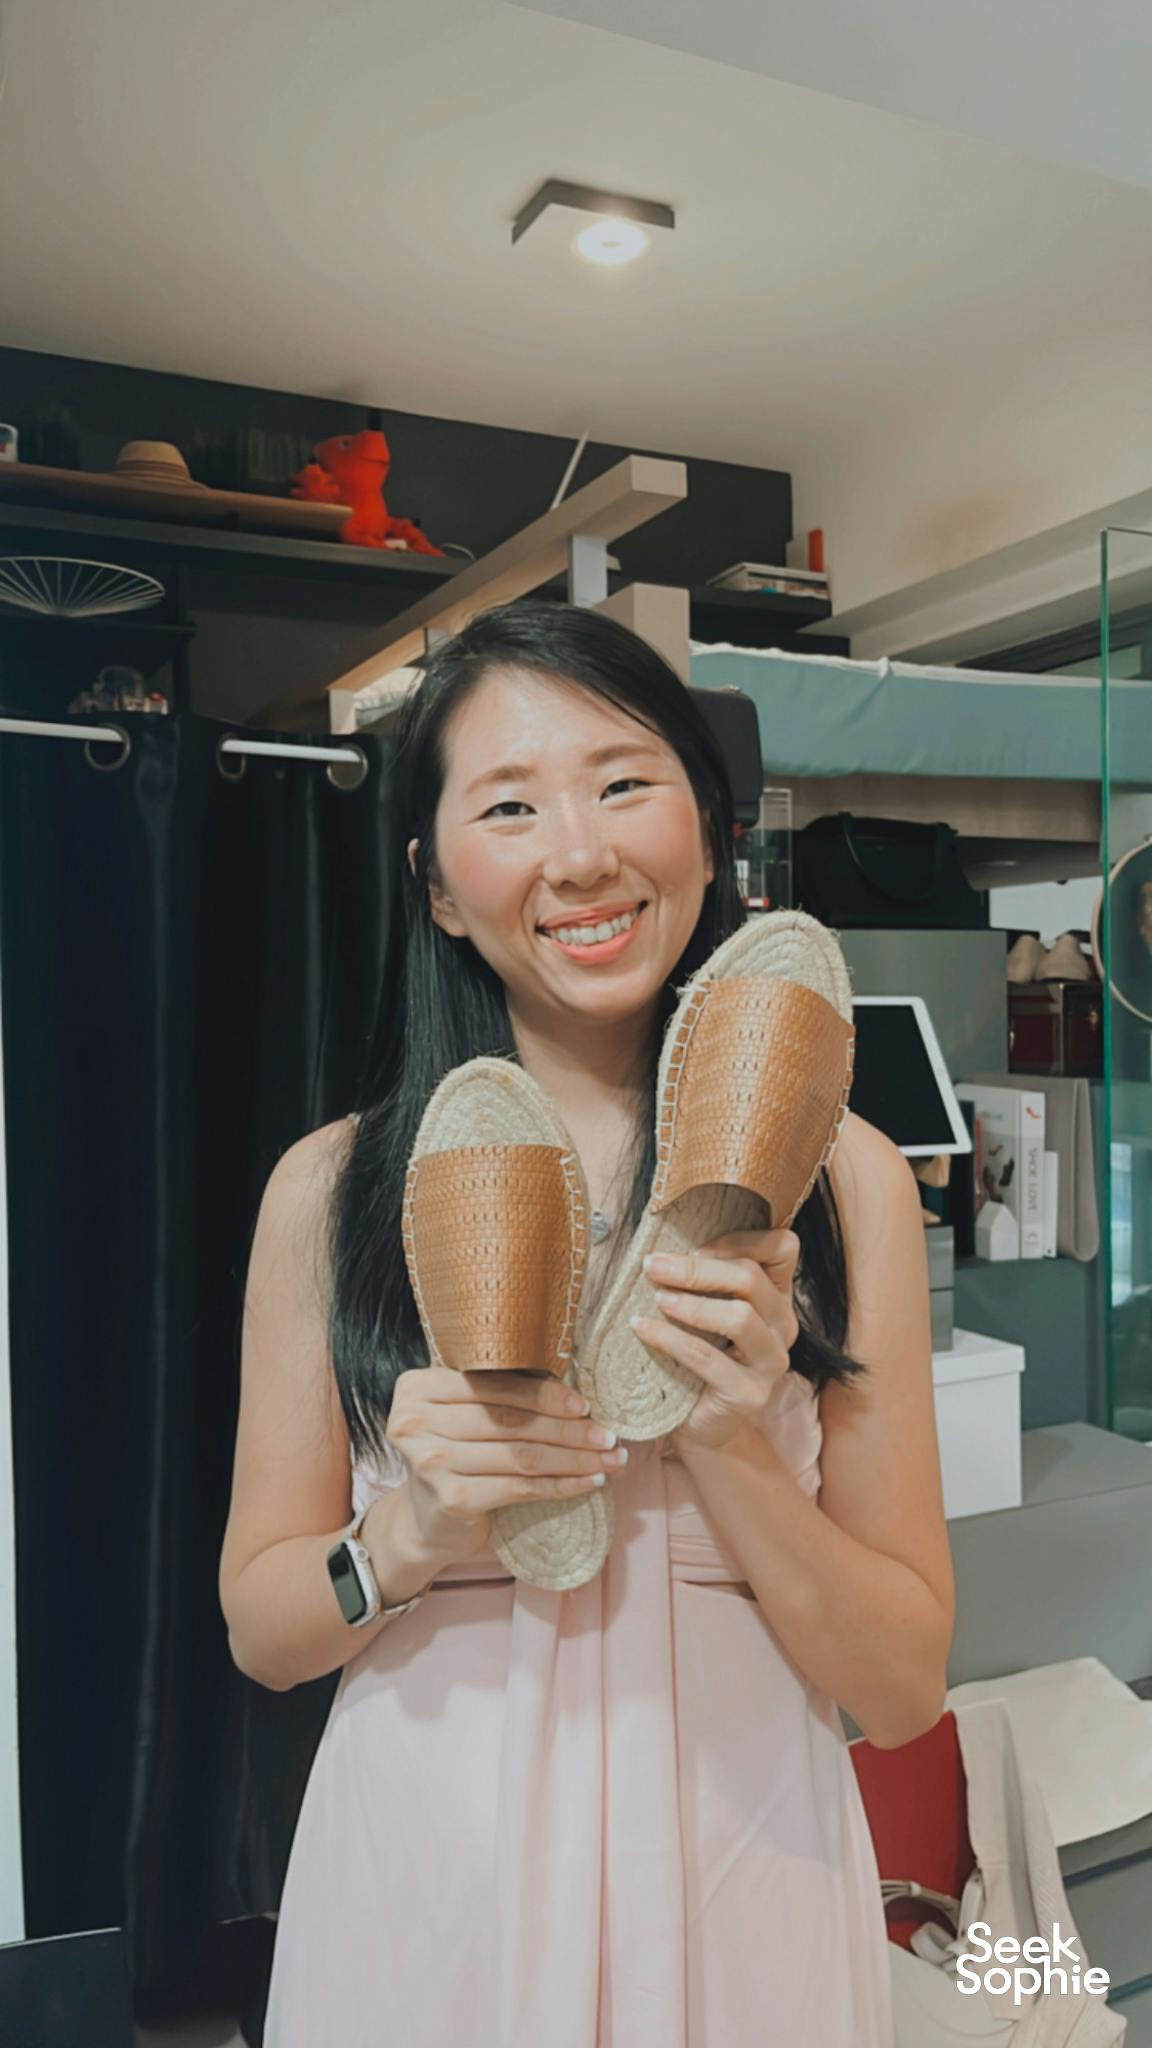 Make Sustainable Sandals with Expert Shoemaker